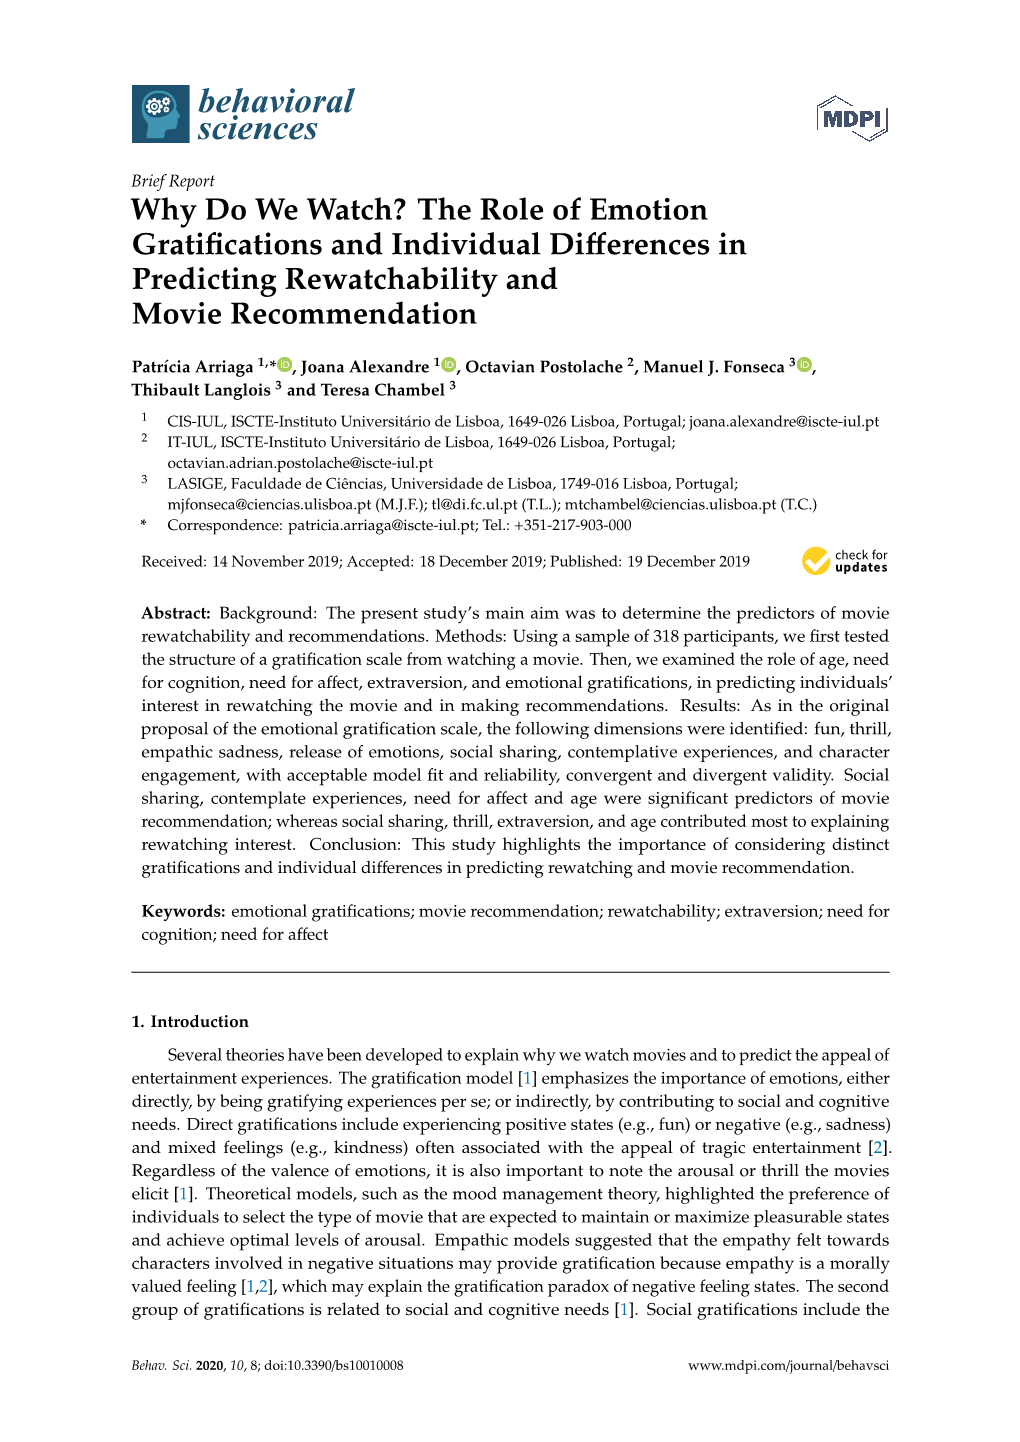 The Role of Emotion Gratifications and Individual Differences In